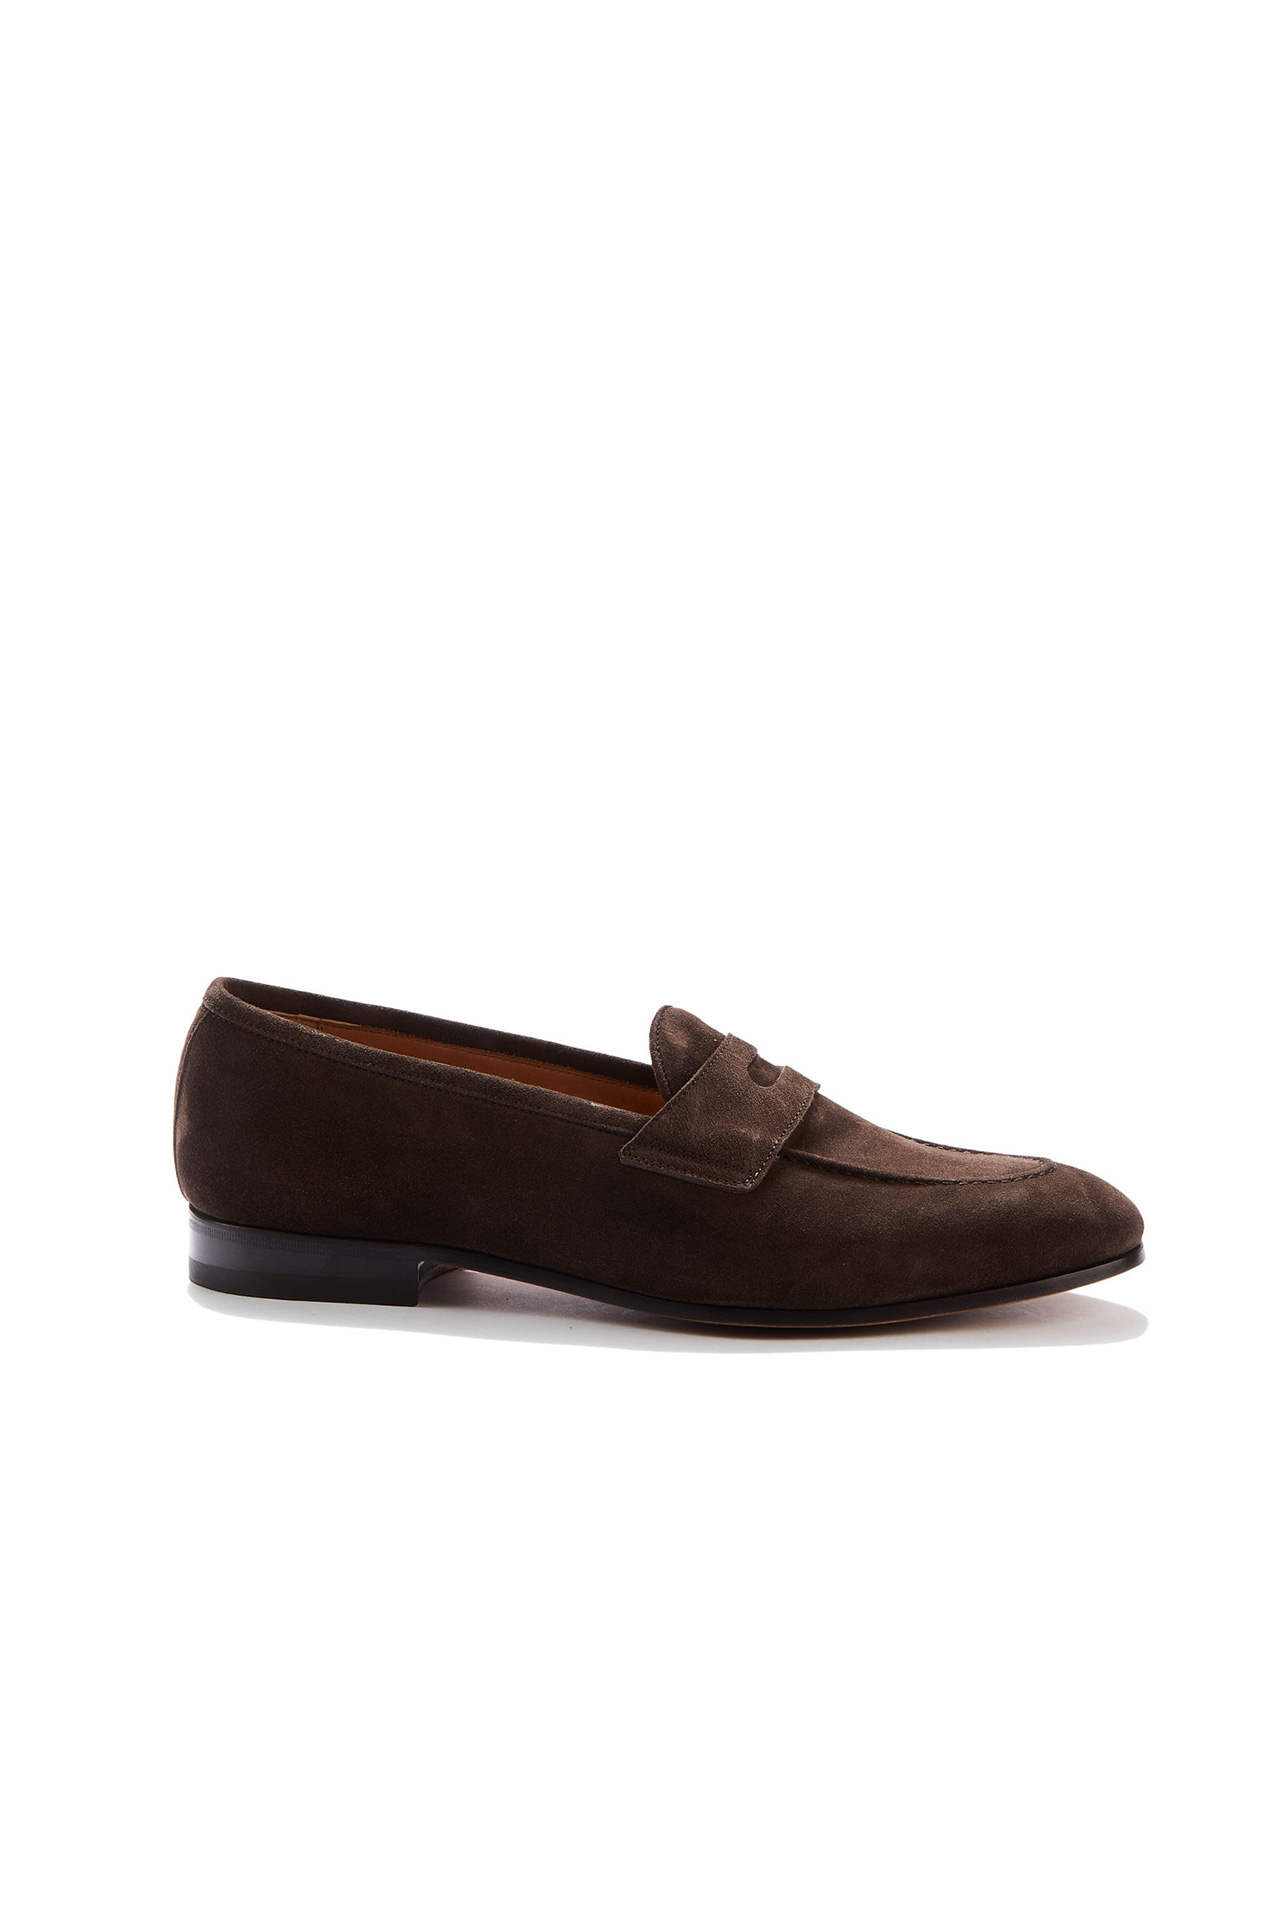 Lawrence Dark Brown Suede Penny Loafers - Barbanera